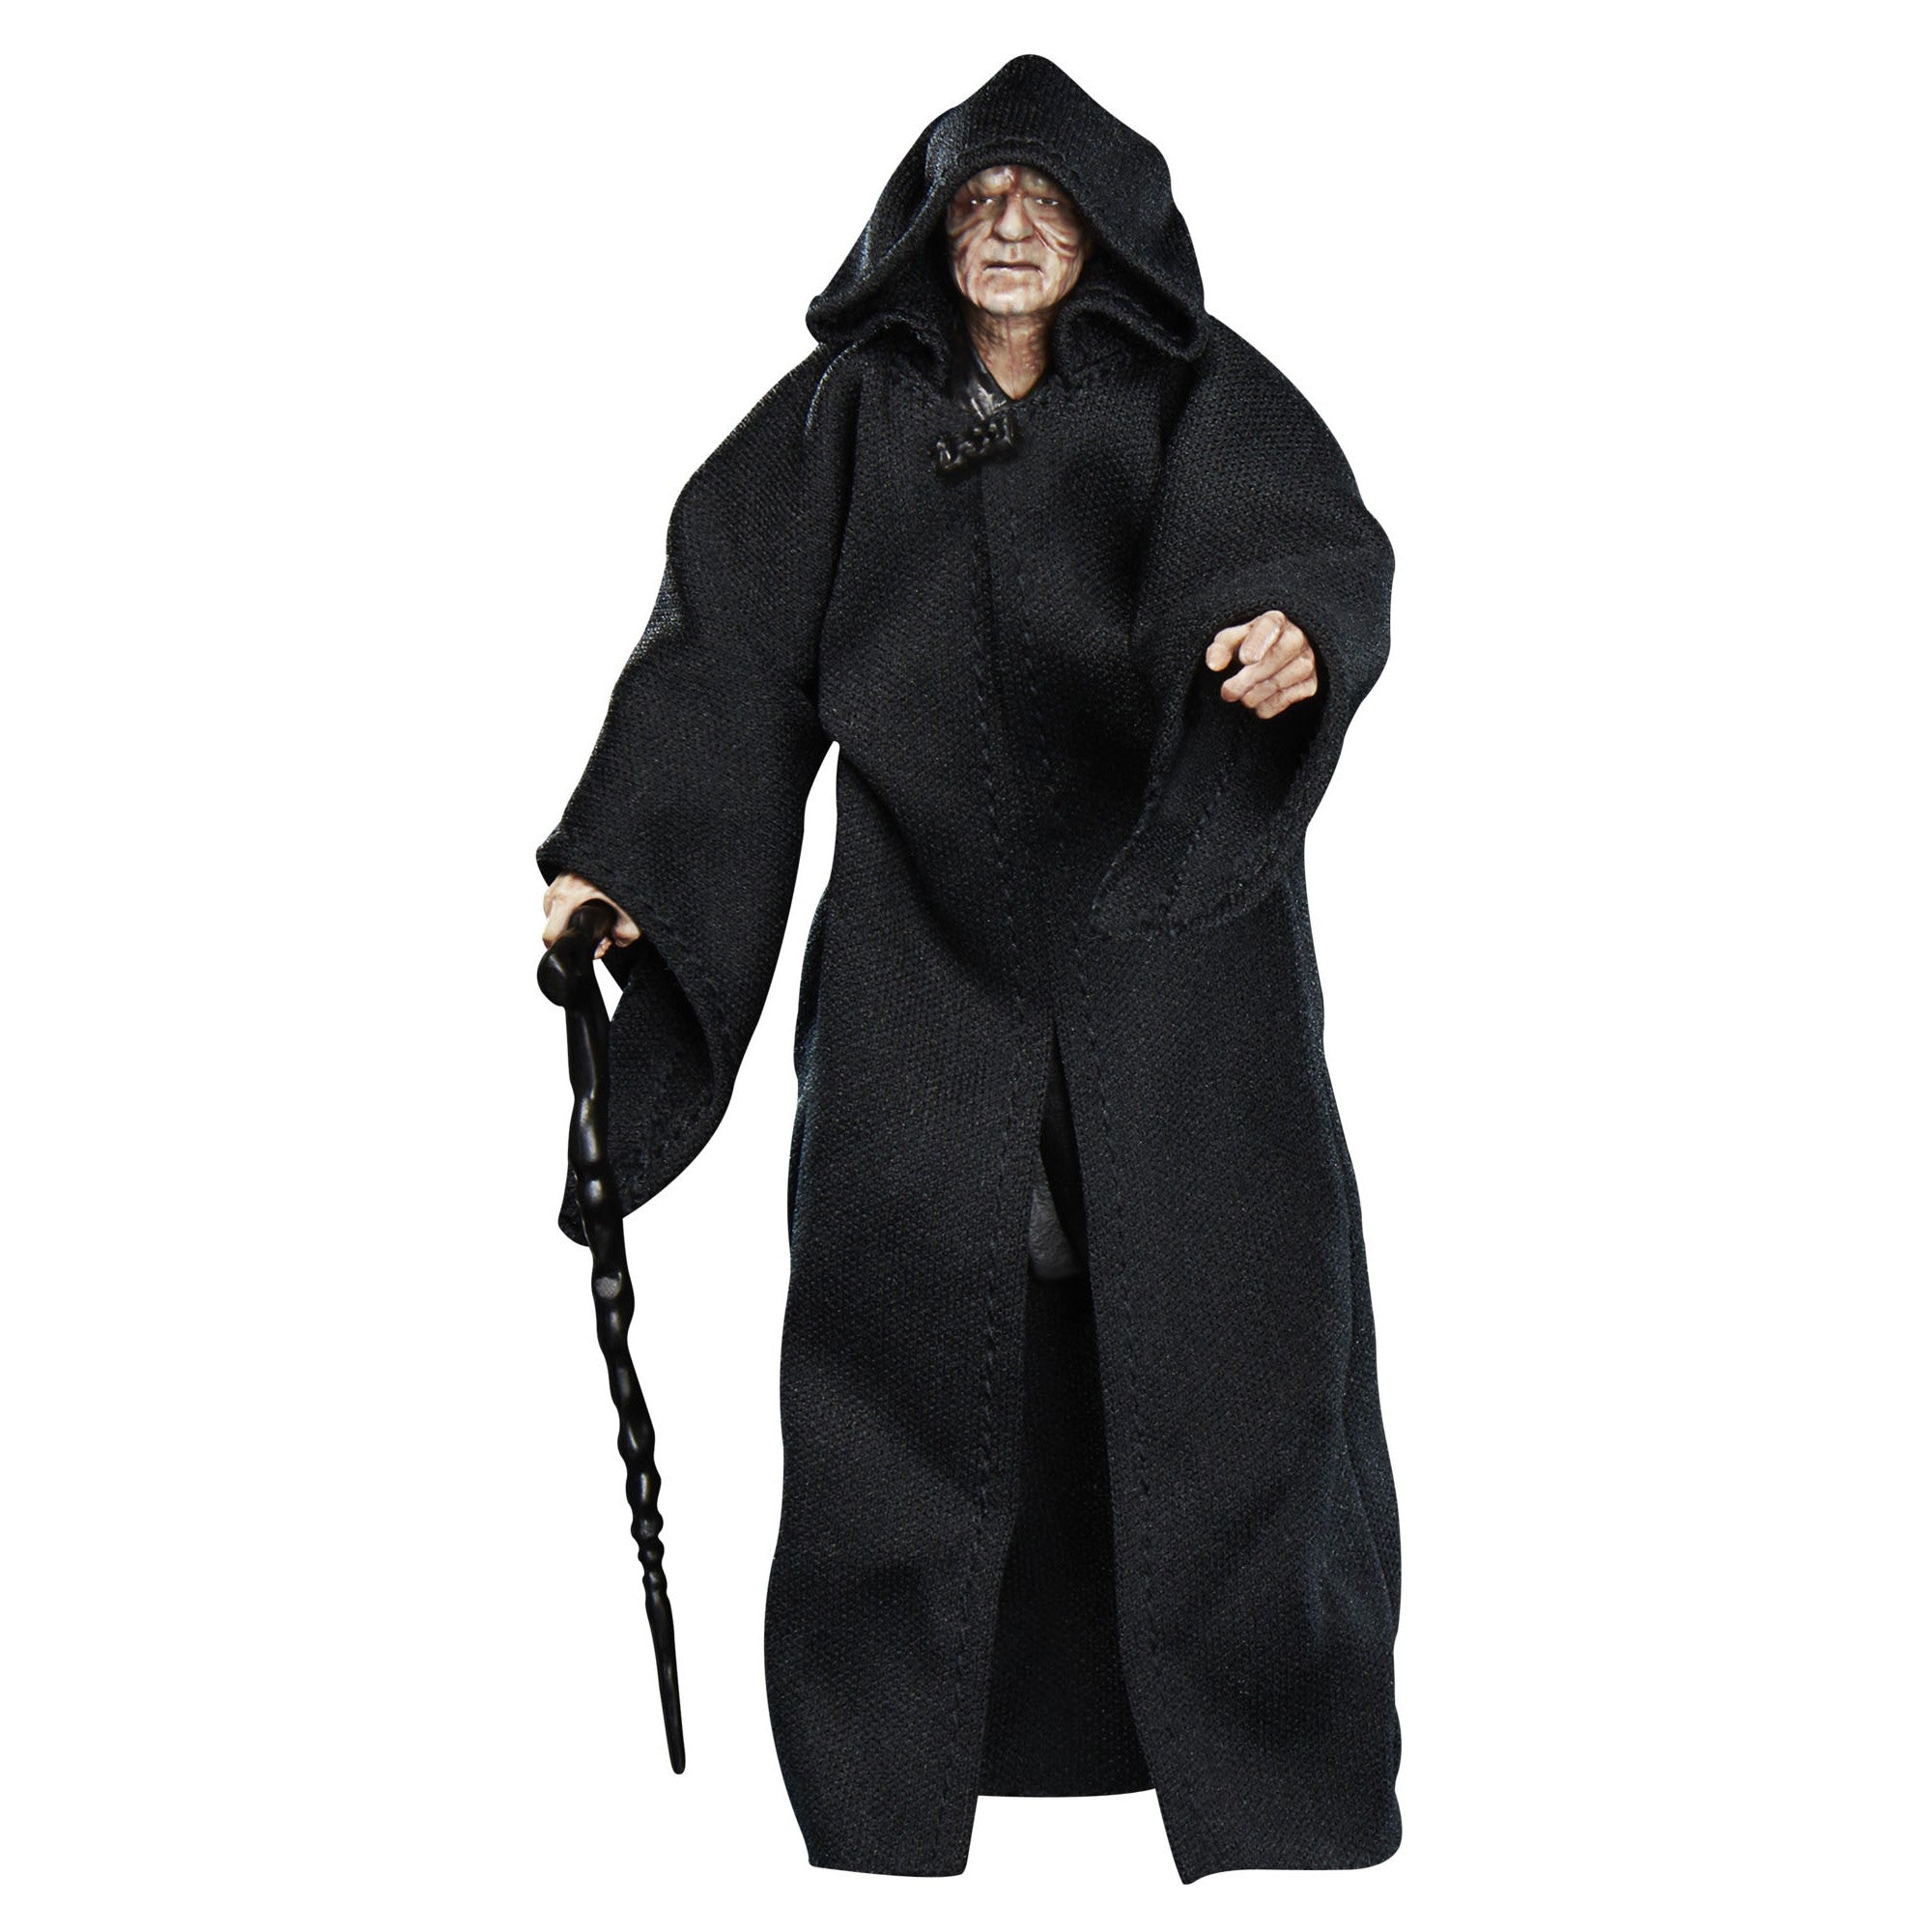 Star Wars Black Series 6" Archive Collection Emperor Palpatine-2